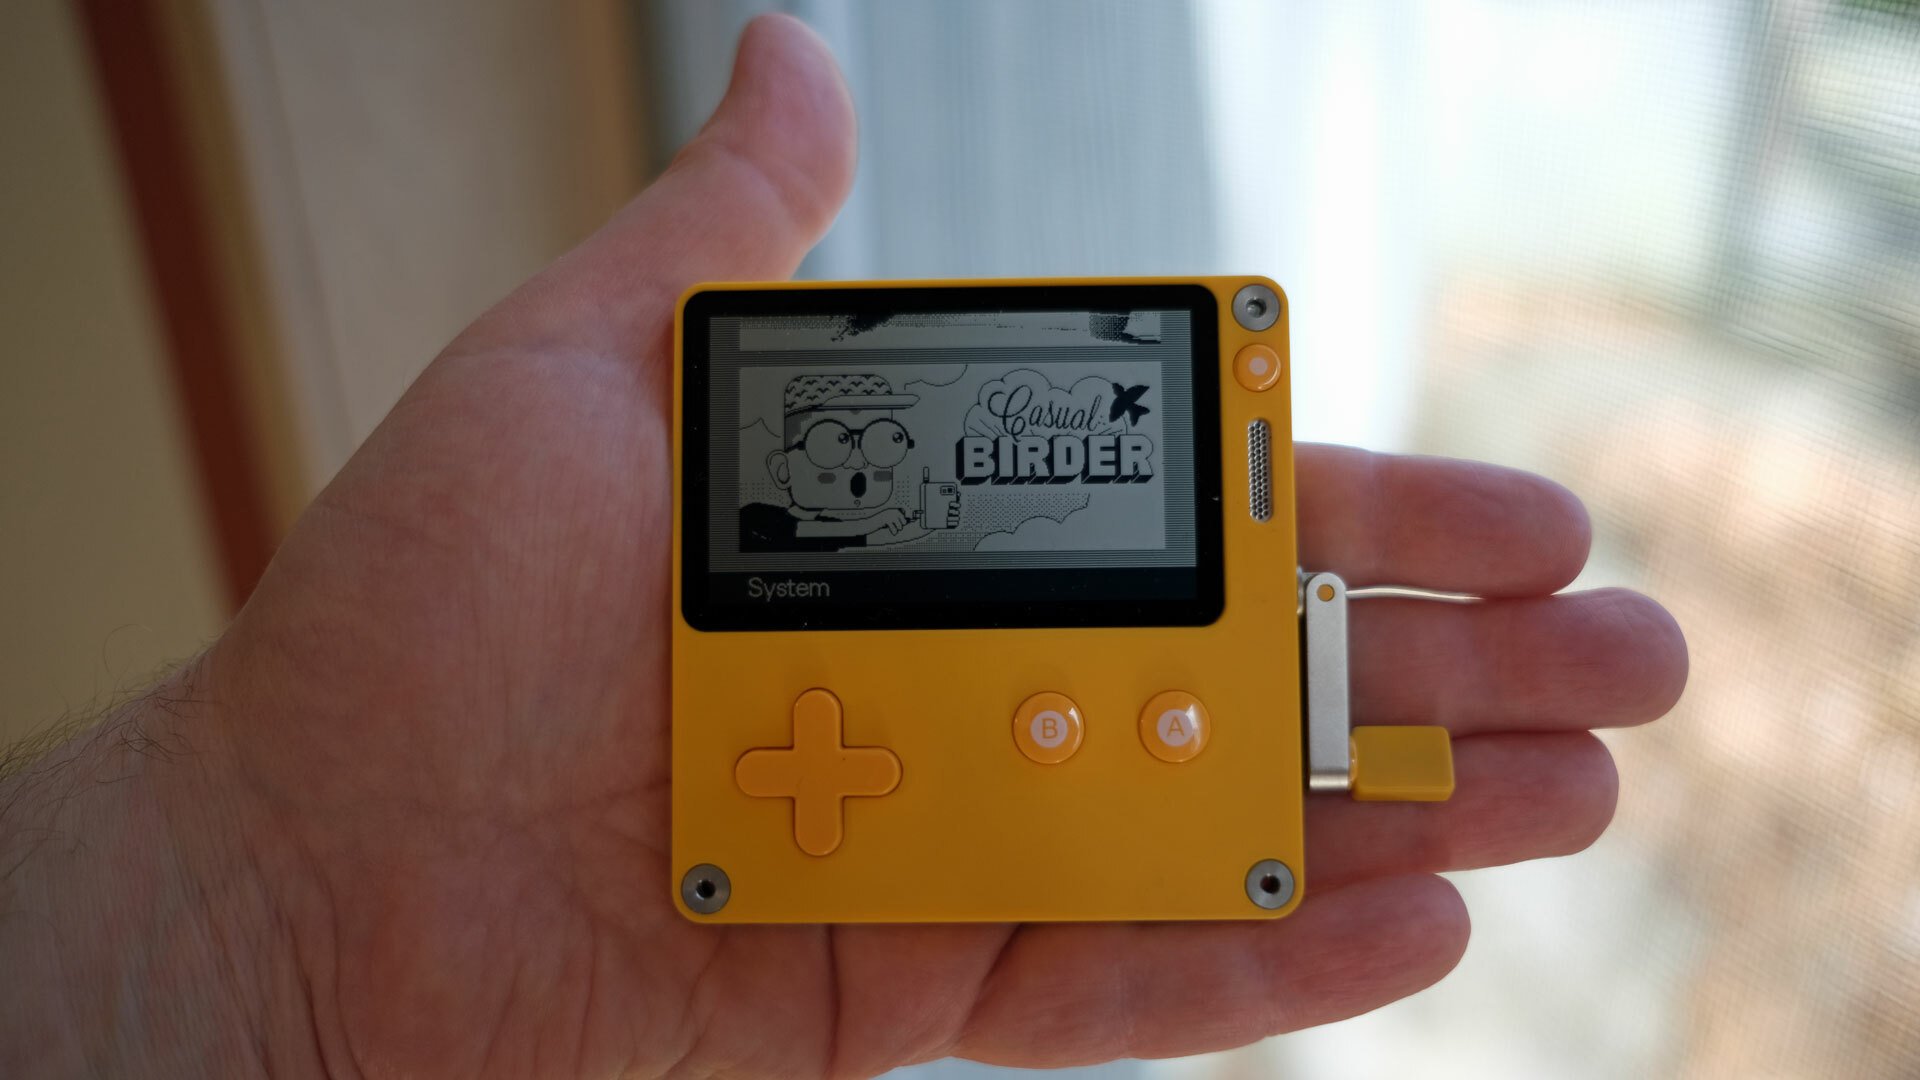 A Playdate gaming device clutched in someone's palm.